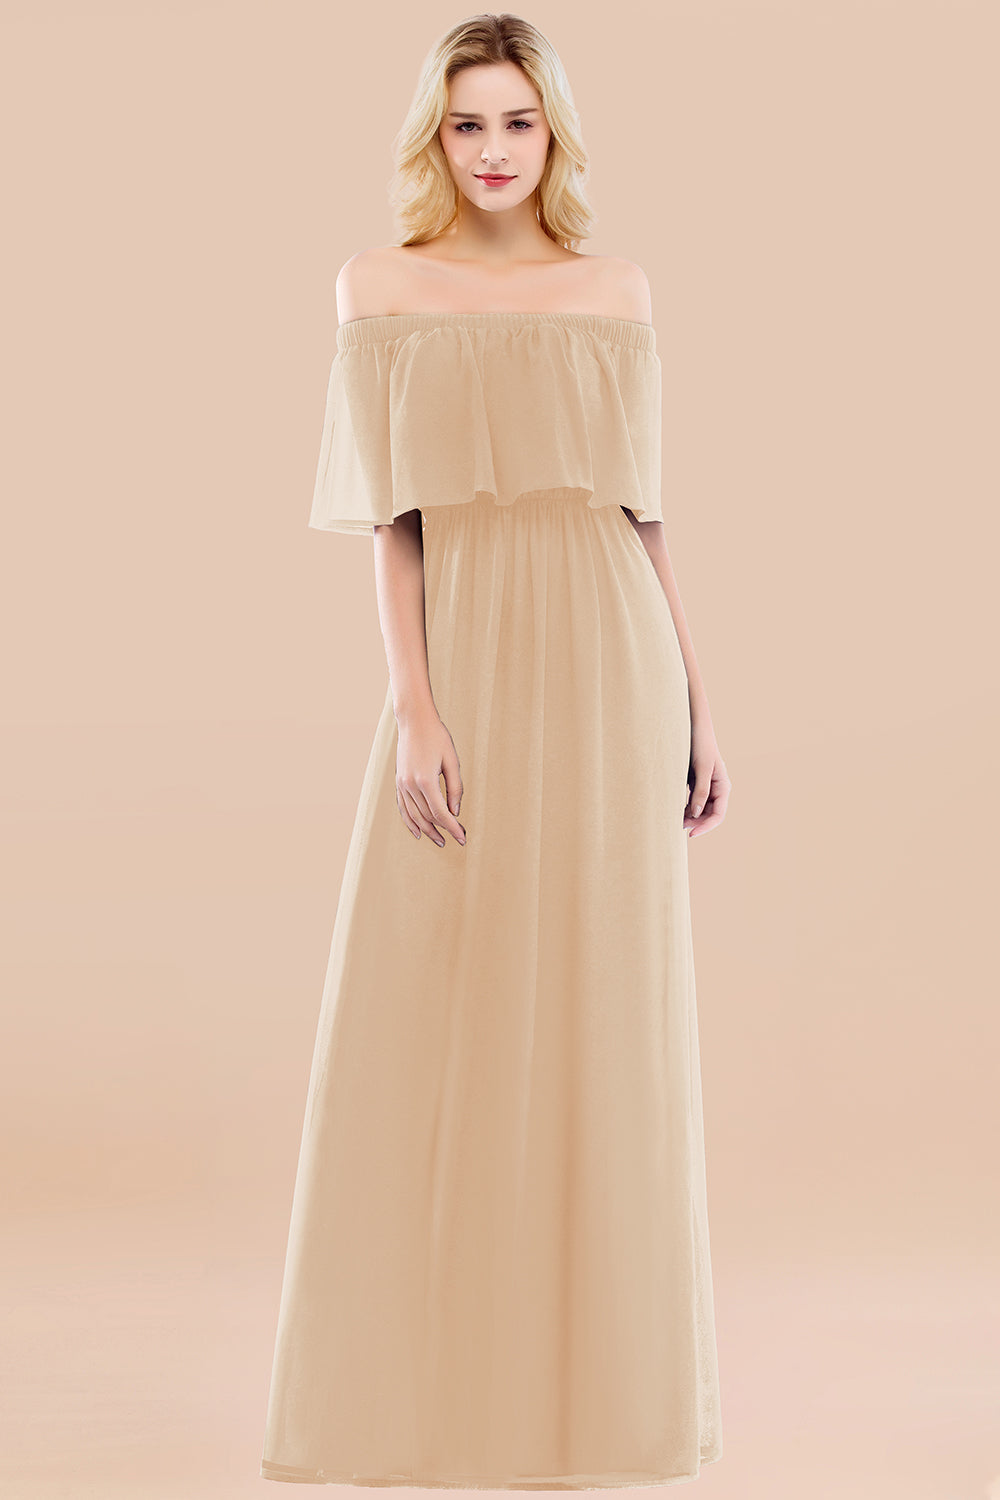 Load image into Gallery viewer, A-line Chiffon Off the Shoulder Ruffles Long Bridesmaid Dress with Sleeves-BIZTUNNEL
